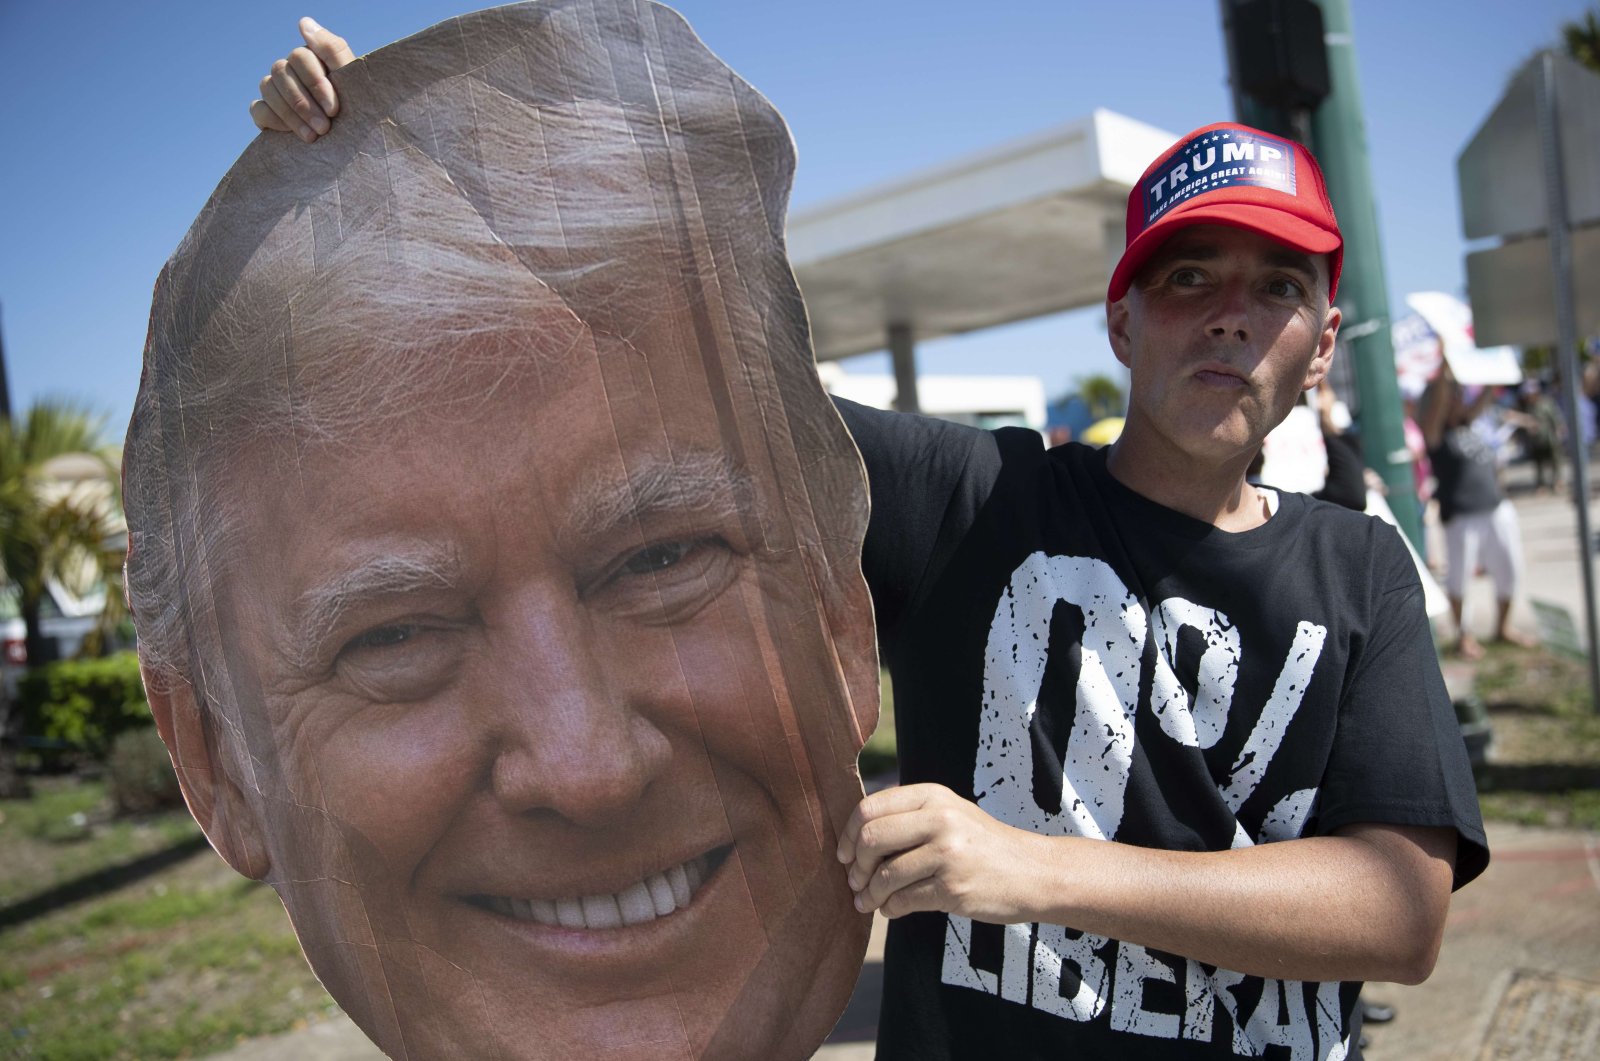 Jonny Riches and other supporters of former U.S. President Donald Trump gather along Southern Blvd near Trump's Mar-a-Lago home in West Palm Beach, Florida, Feb. 15, 2021. (AFP Photo)